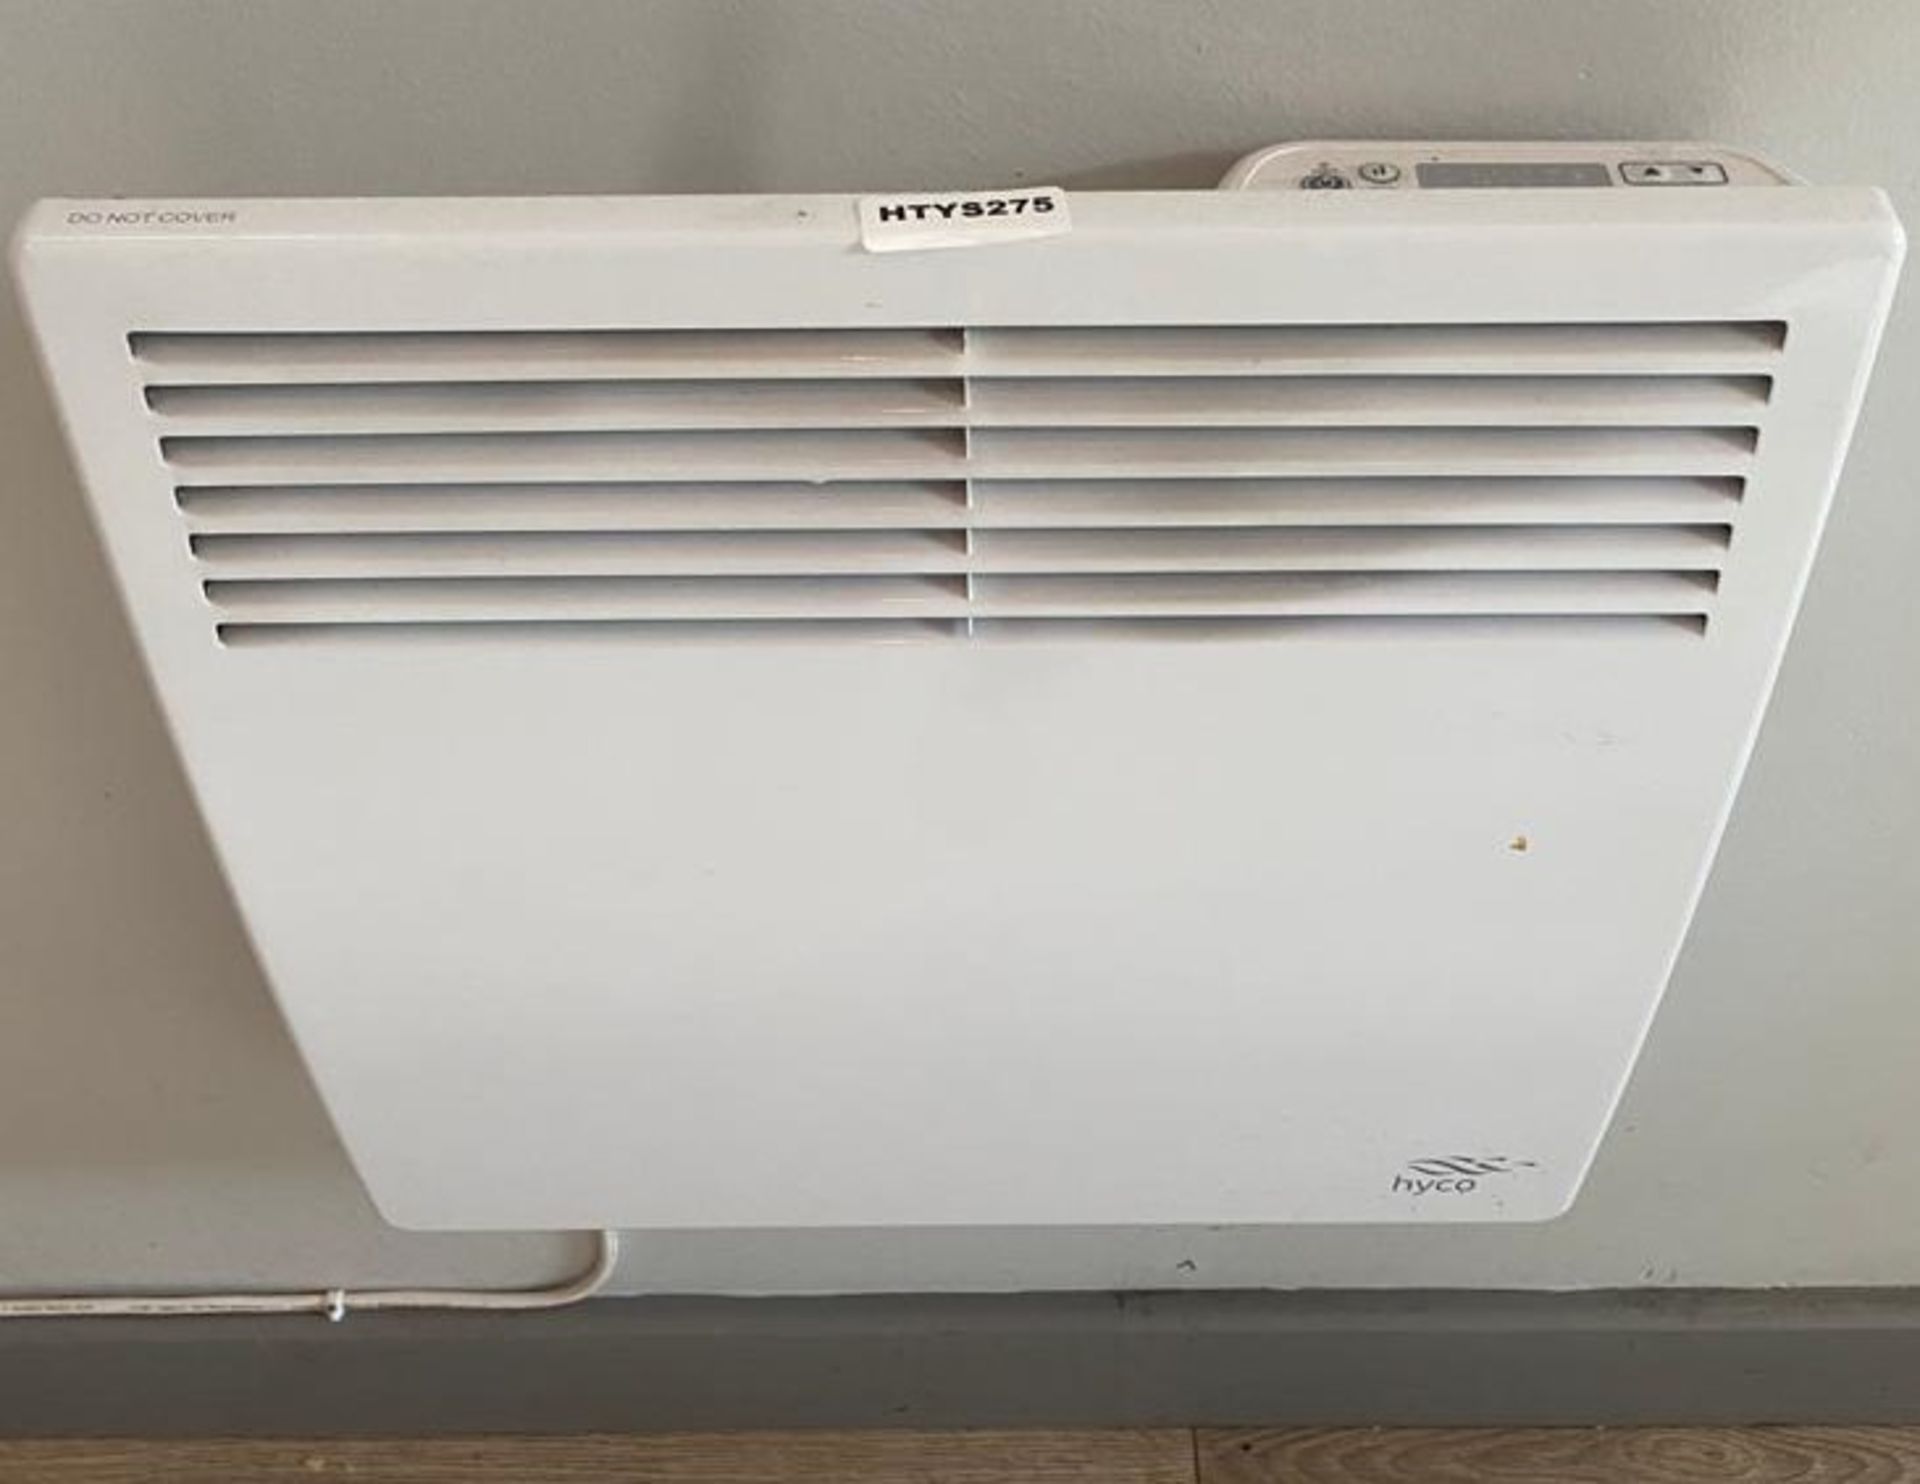 4 x Hyco Wall Mounted Digital Convector Heaters - Ref: HTYS275 - CL782 - Location: Leicester,